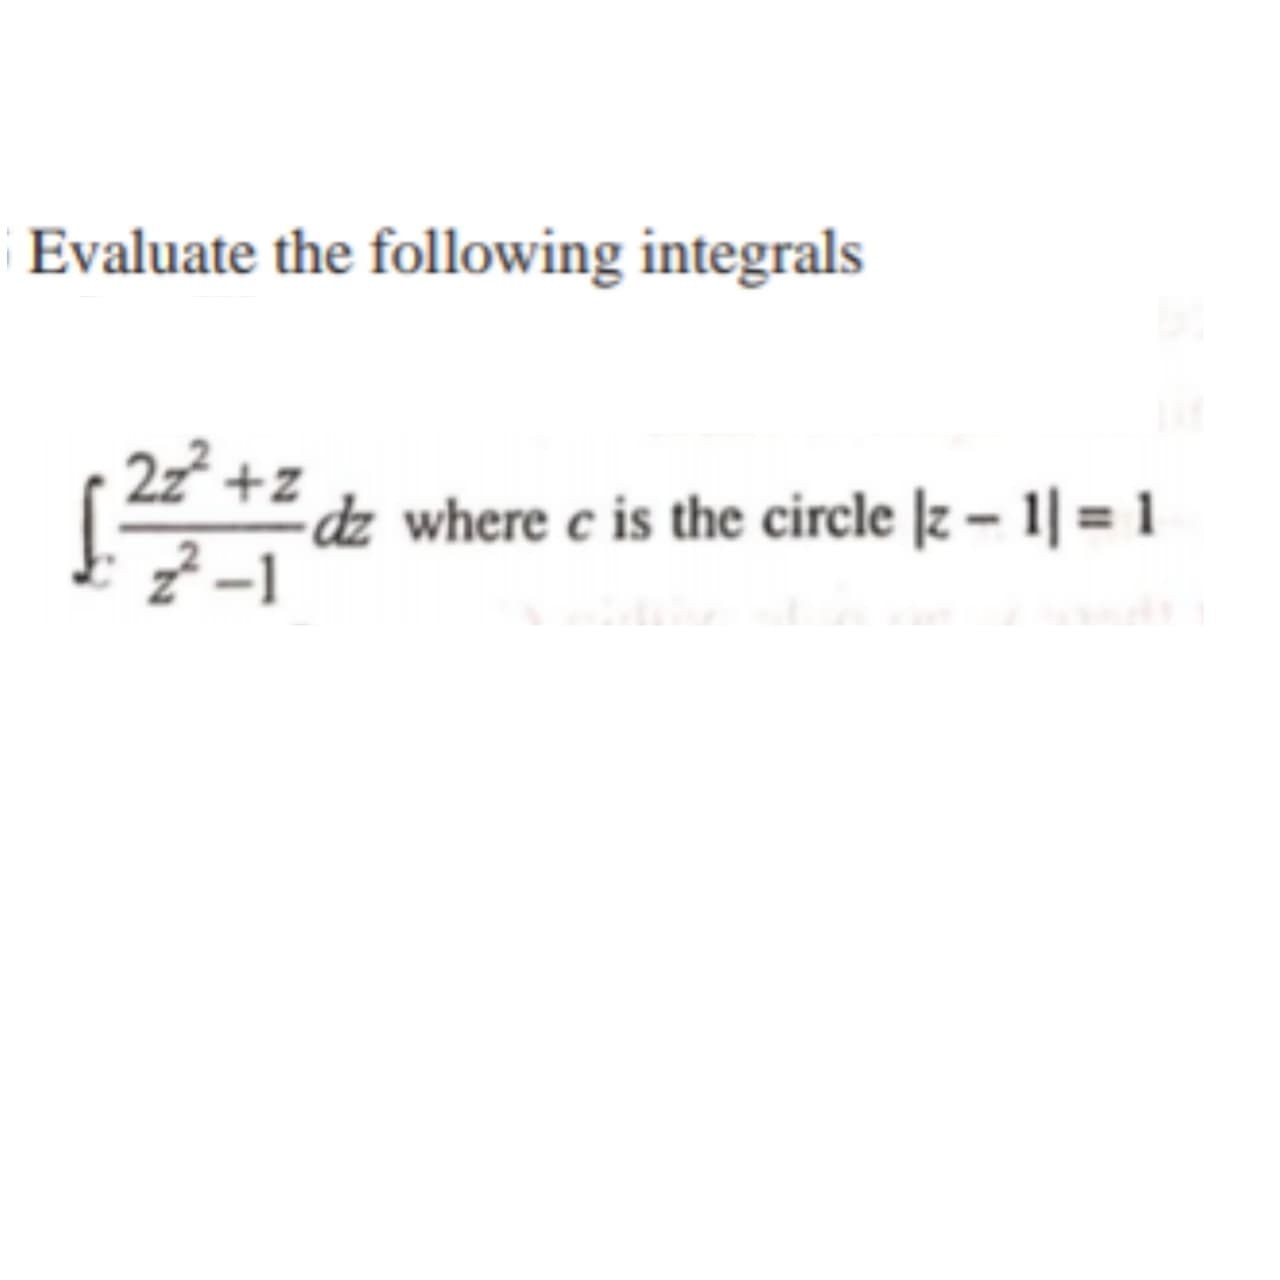 Evaluate the following integrals
